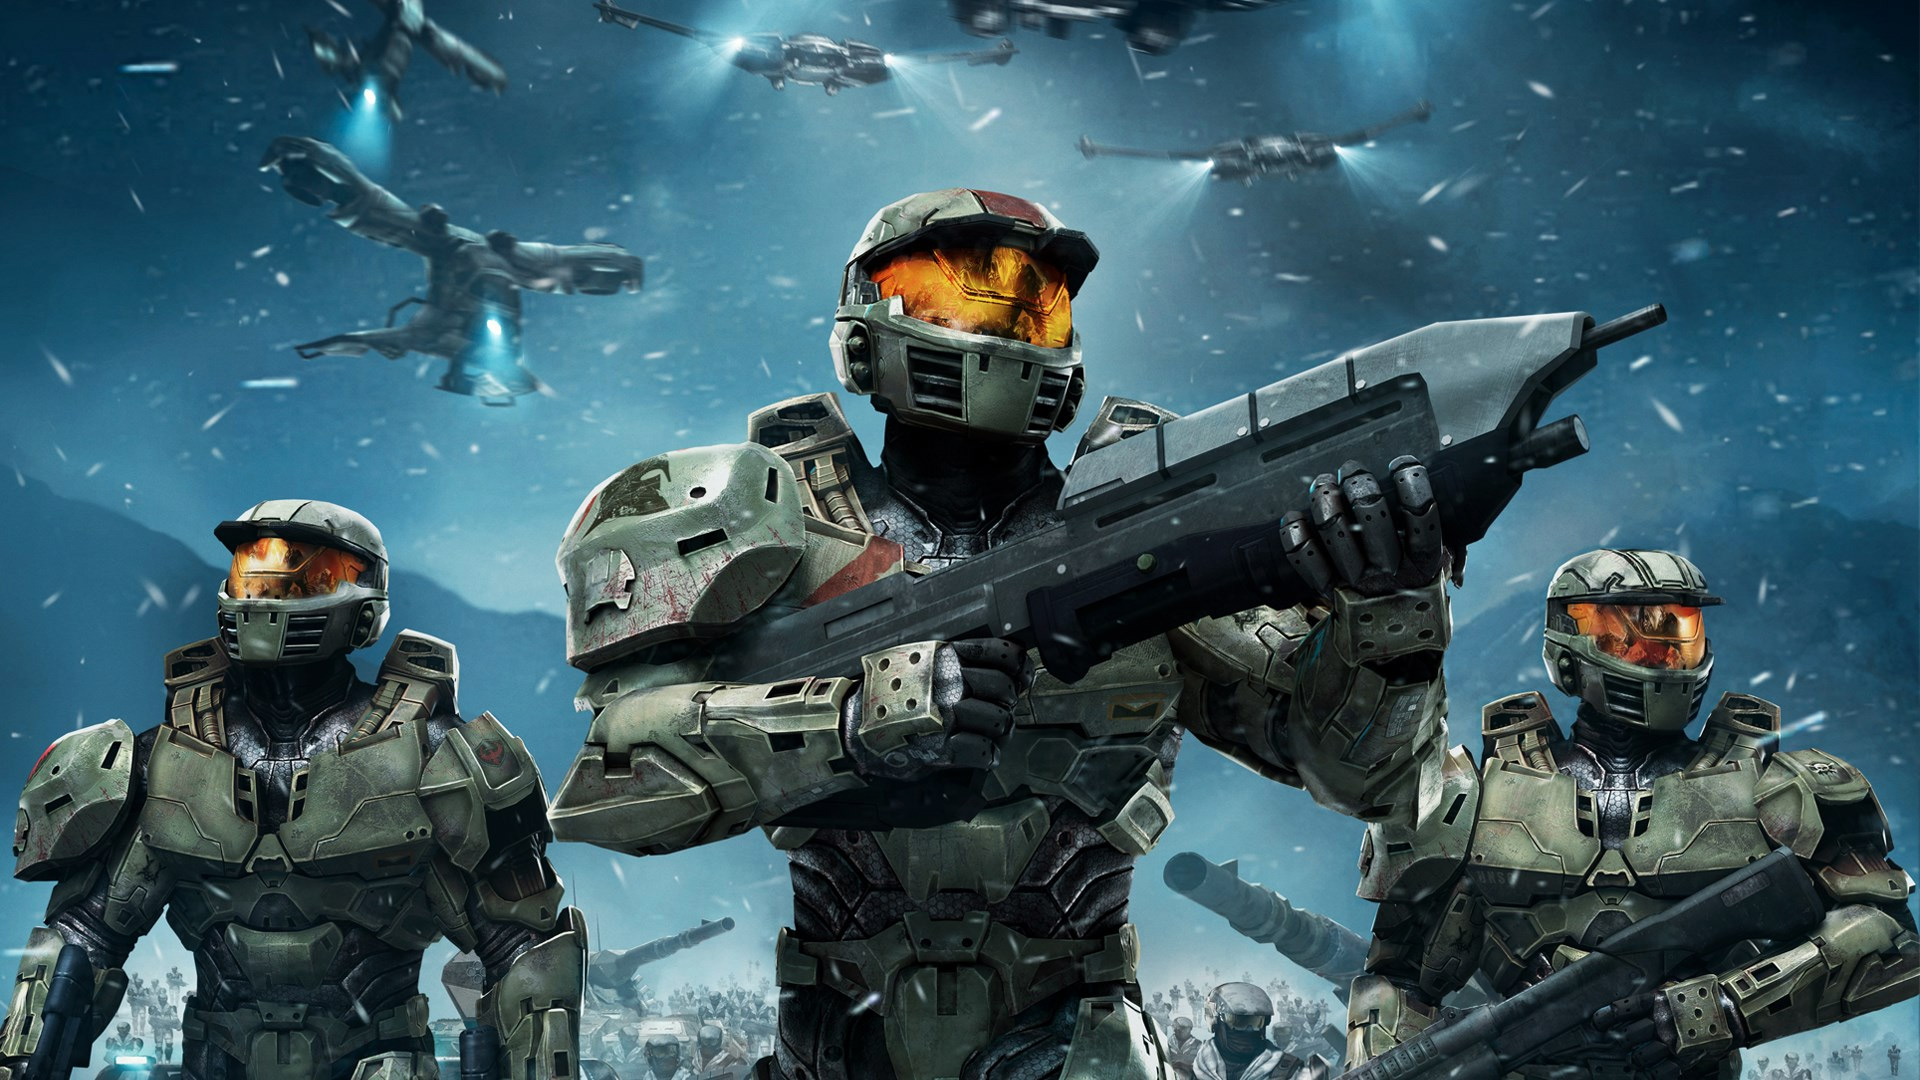 Halo games in order: Halo Wars art showing three Spartans with various aerial vehicles behind them.